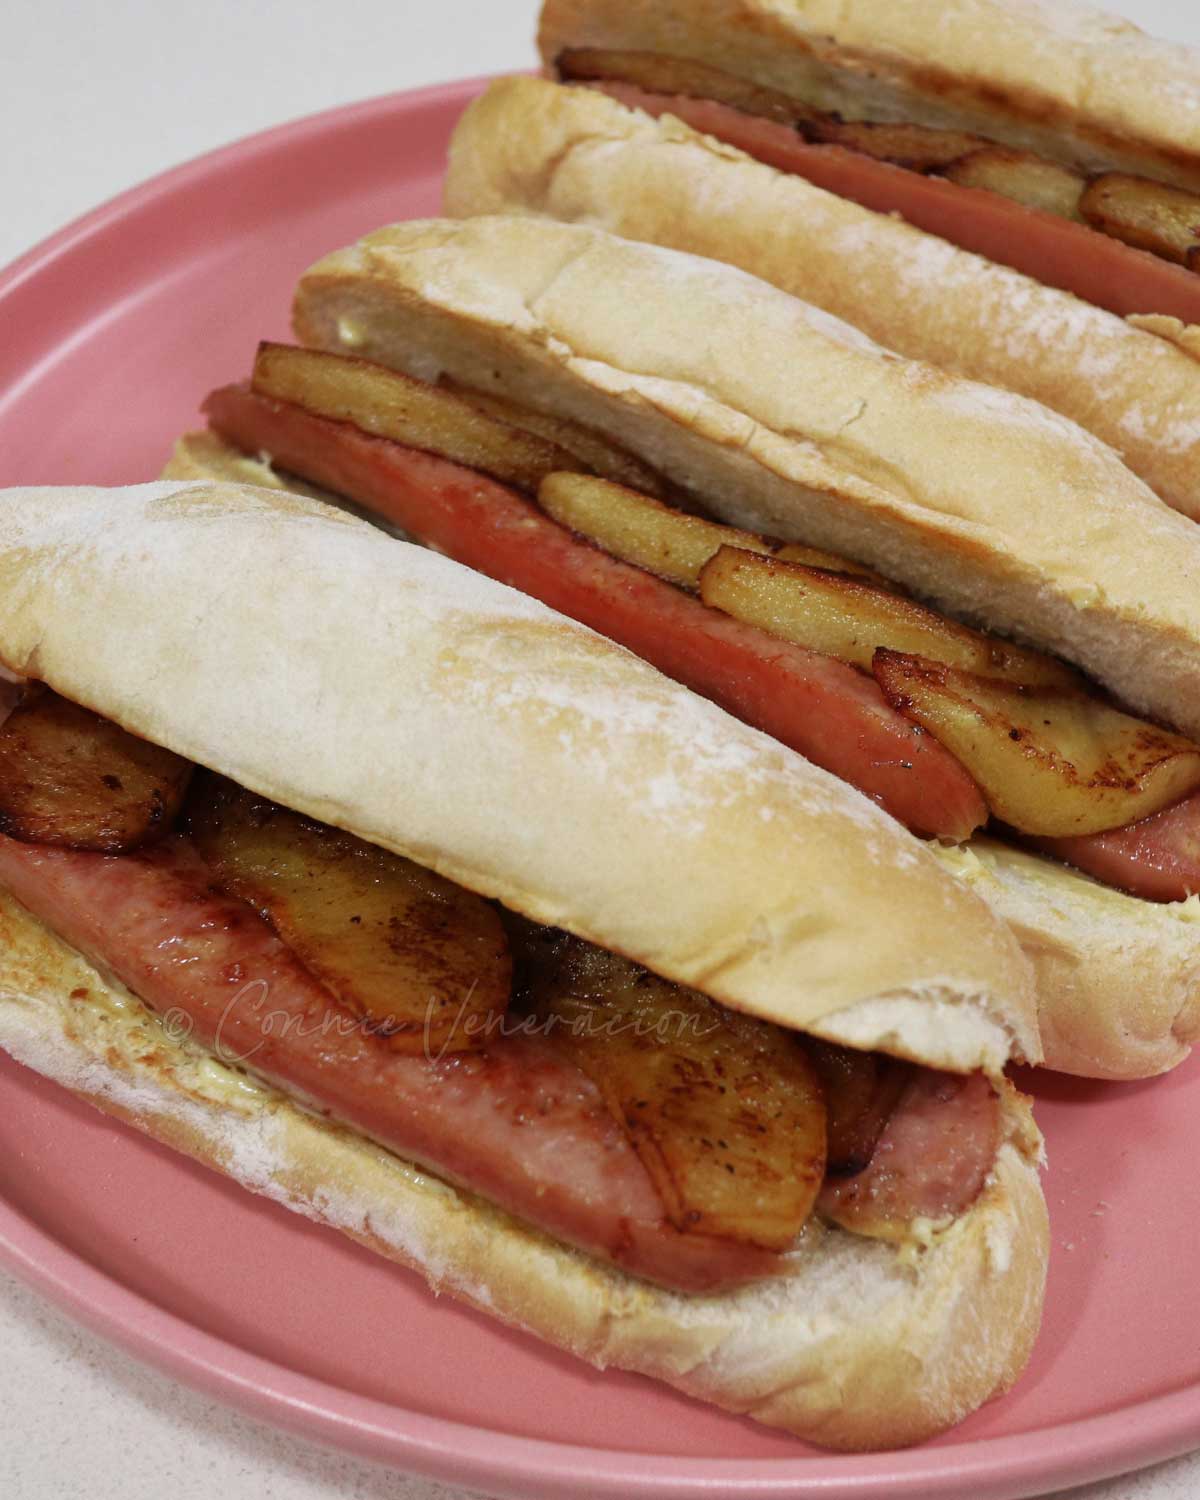 Sausage and apple sandwiches